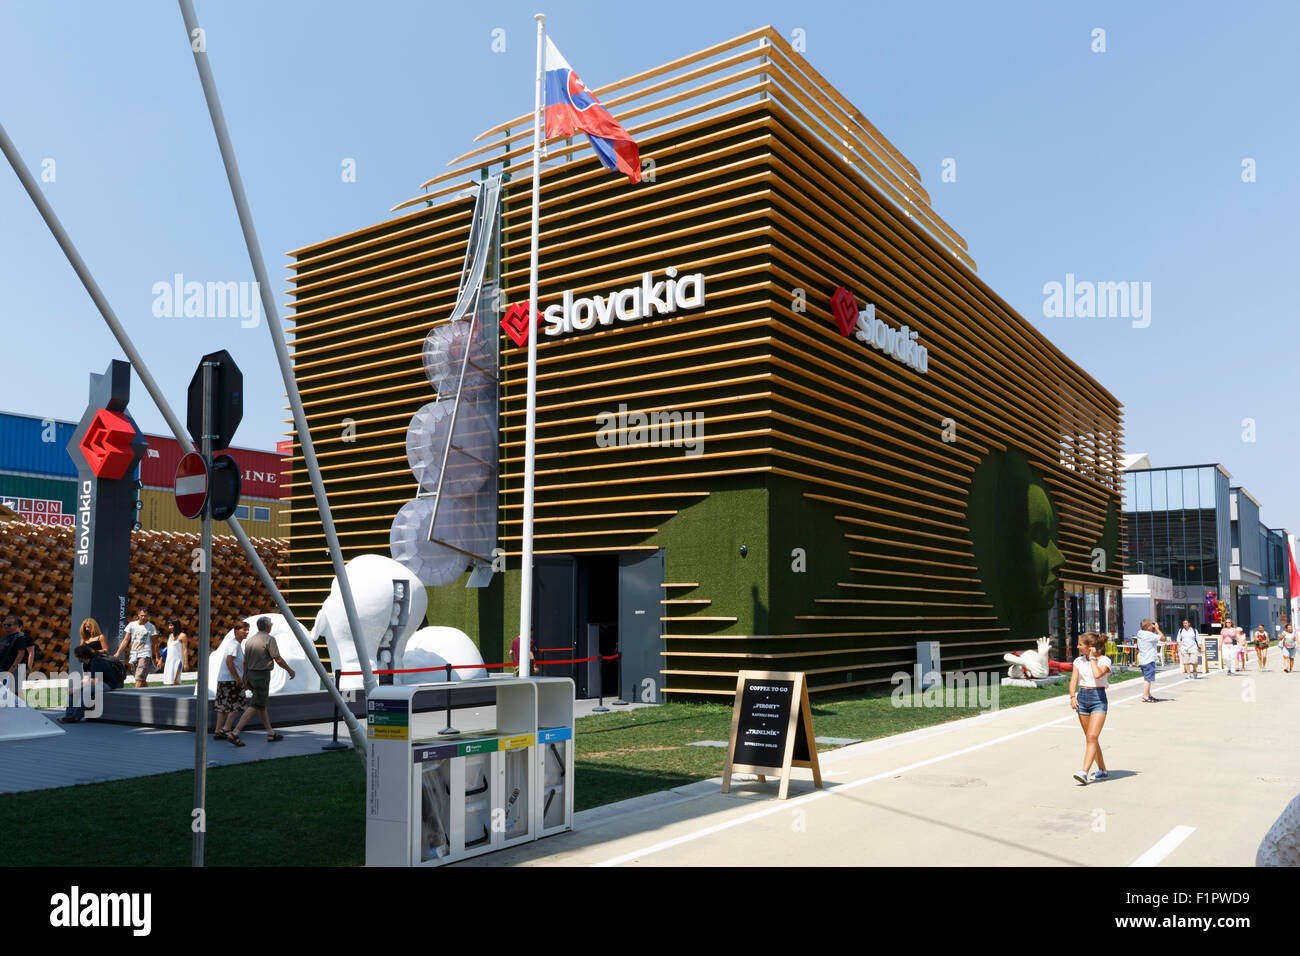 Milan, Italy, 12 August 2015: Detail of the Slovakia pavilion at the exhibition Expo 2015 Italy. Stock Photo